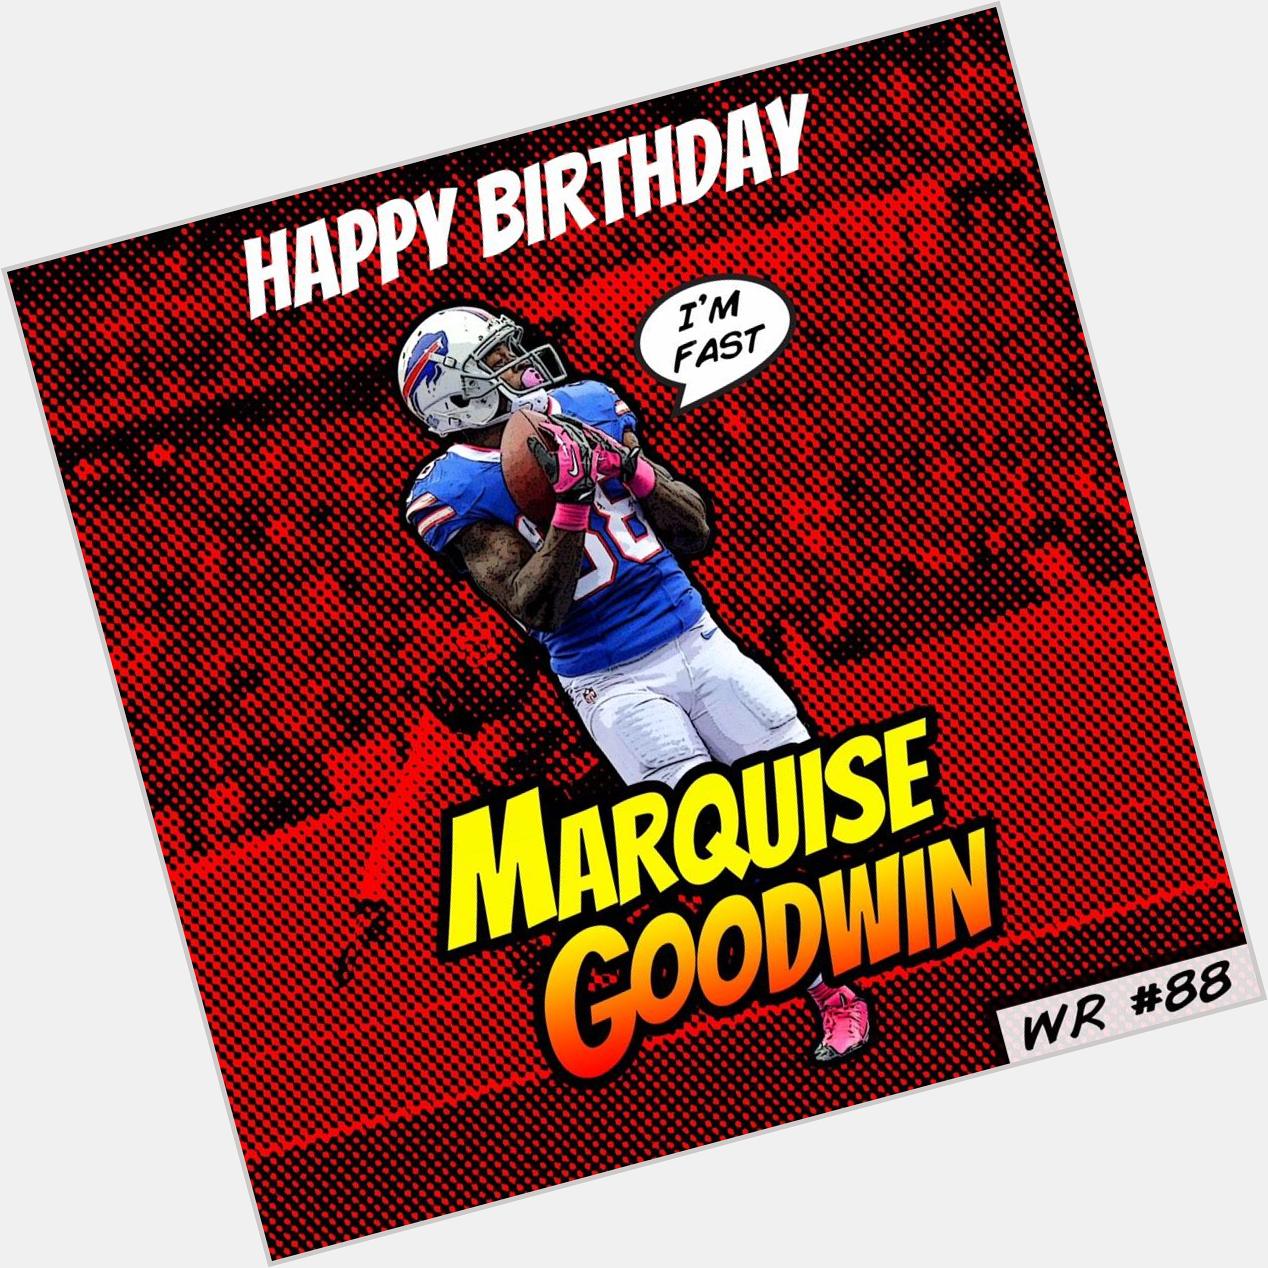 Wishing a happy (and snowy) birthday to Marquise Goodwin! 